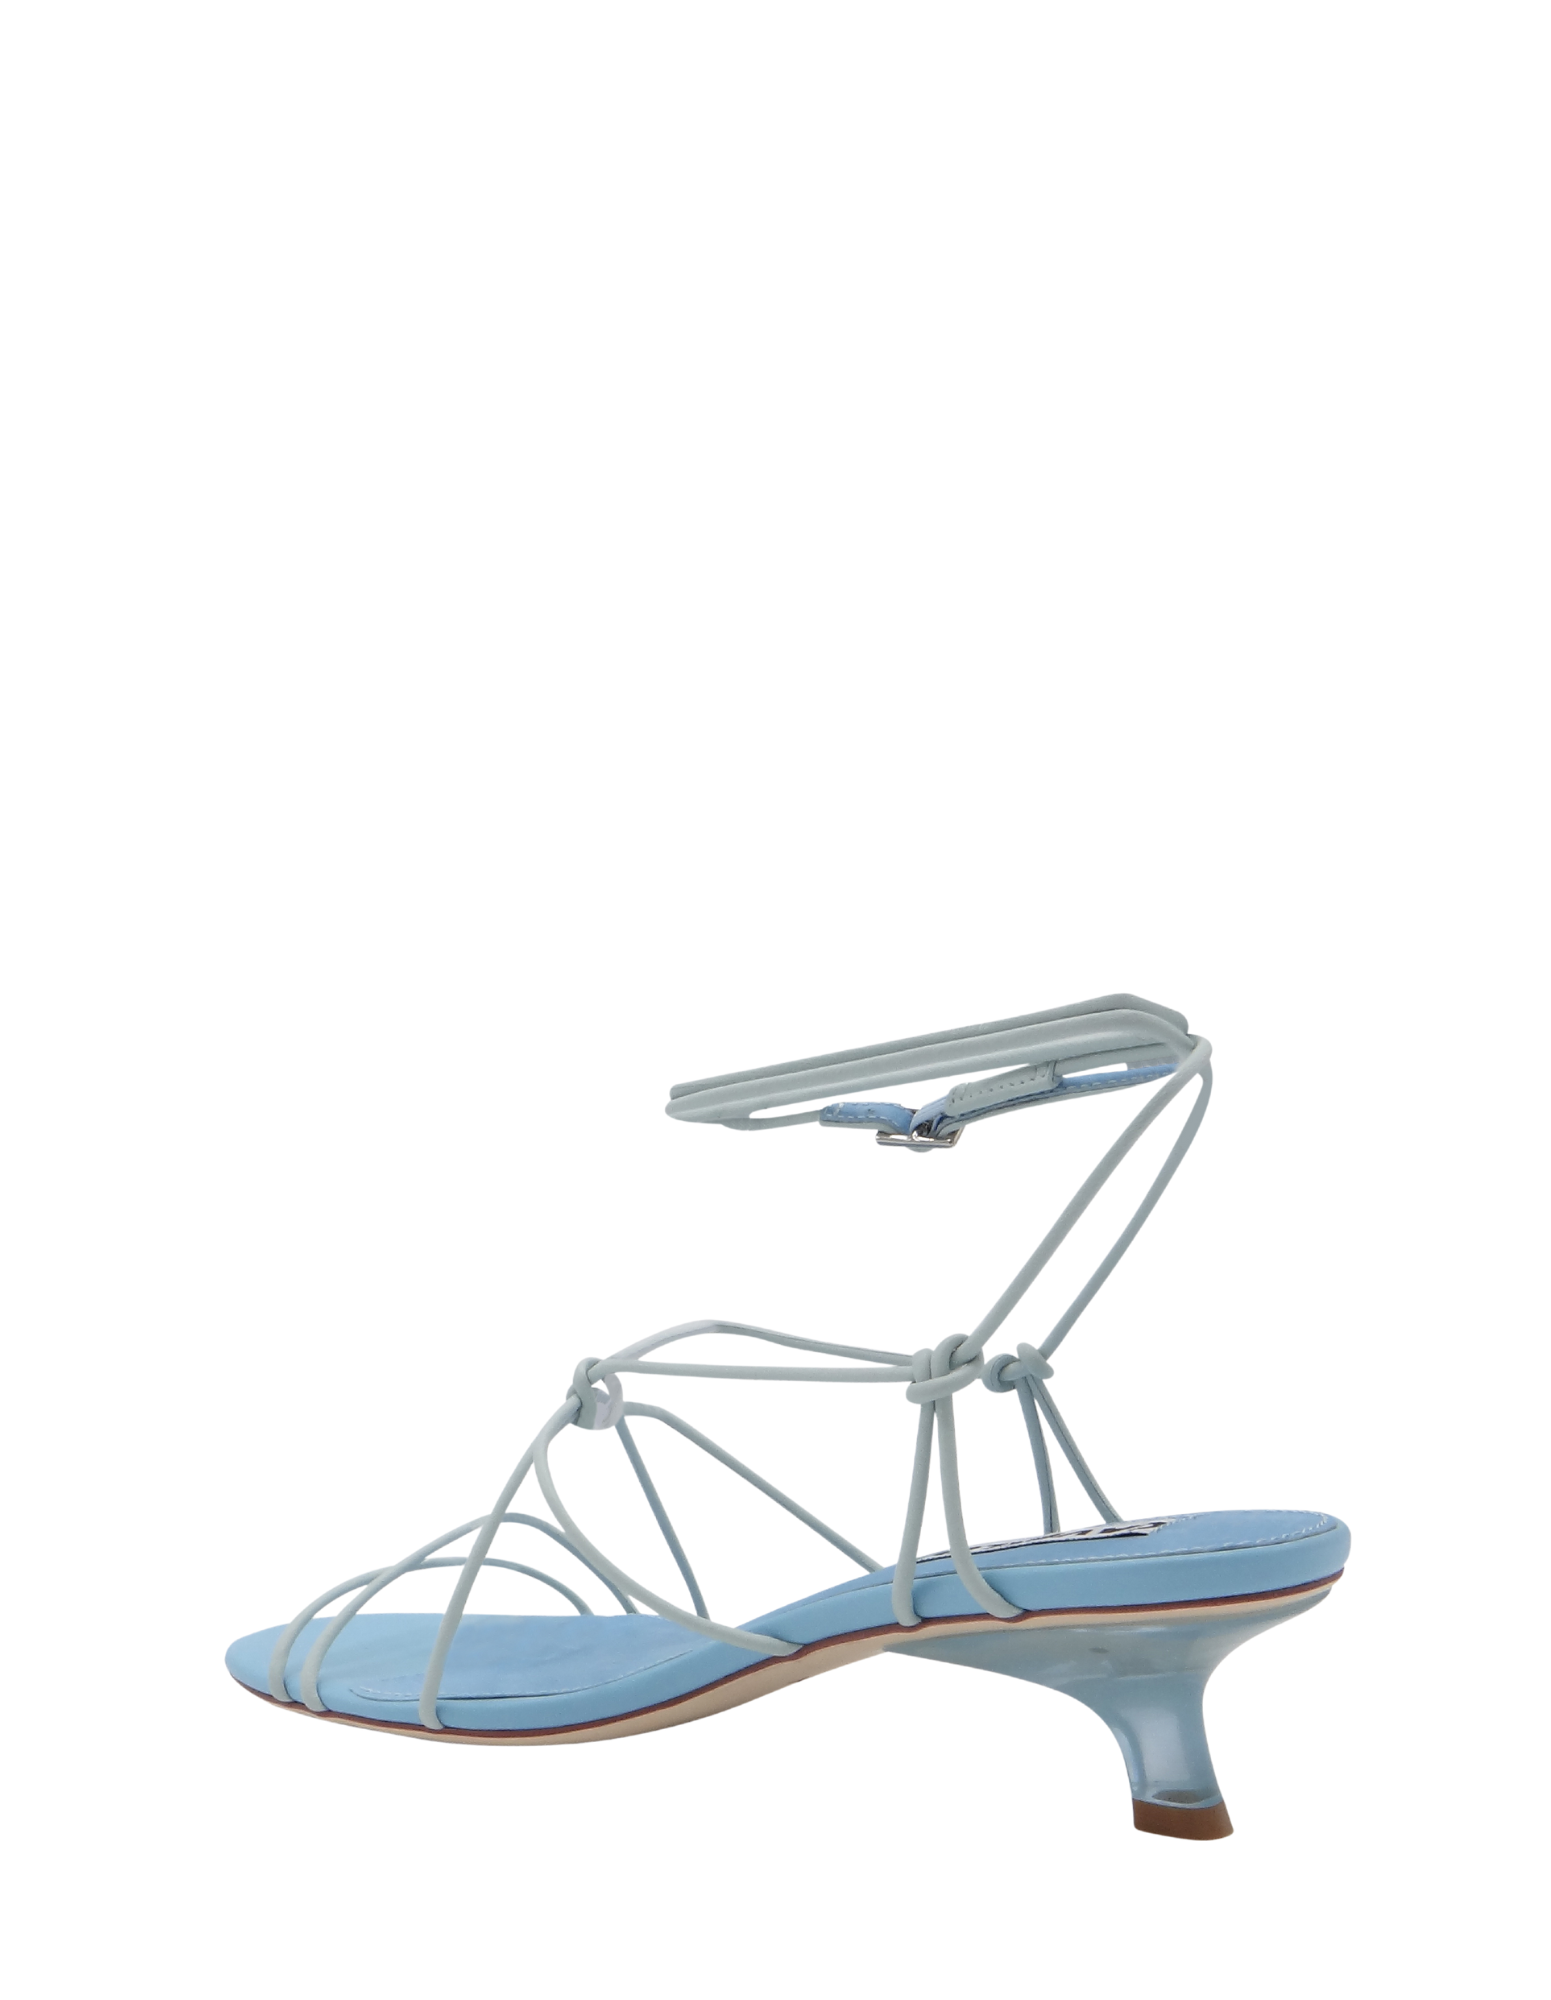 CAVERLEY Amber Heel in Light Blue 23S509C Periwinkle Blue FROM EIGHTYWINGOLD - OFFICIAL BRAND PARTNER